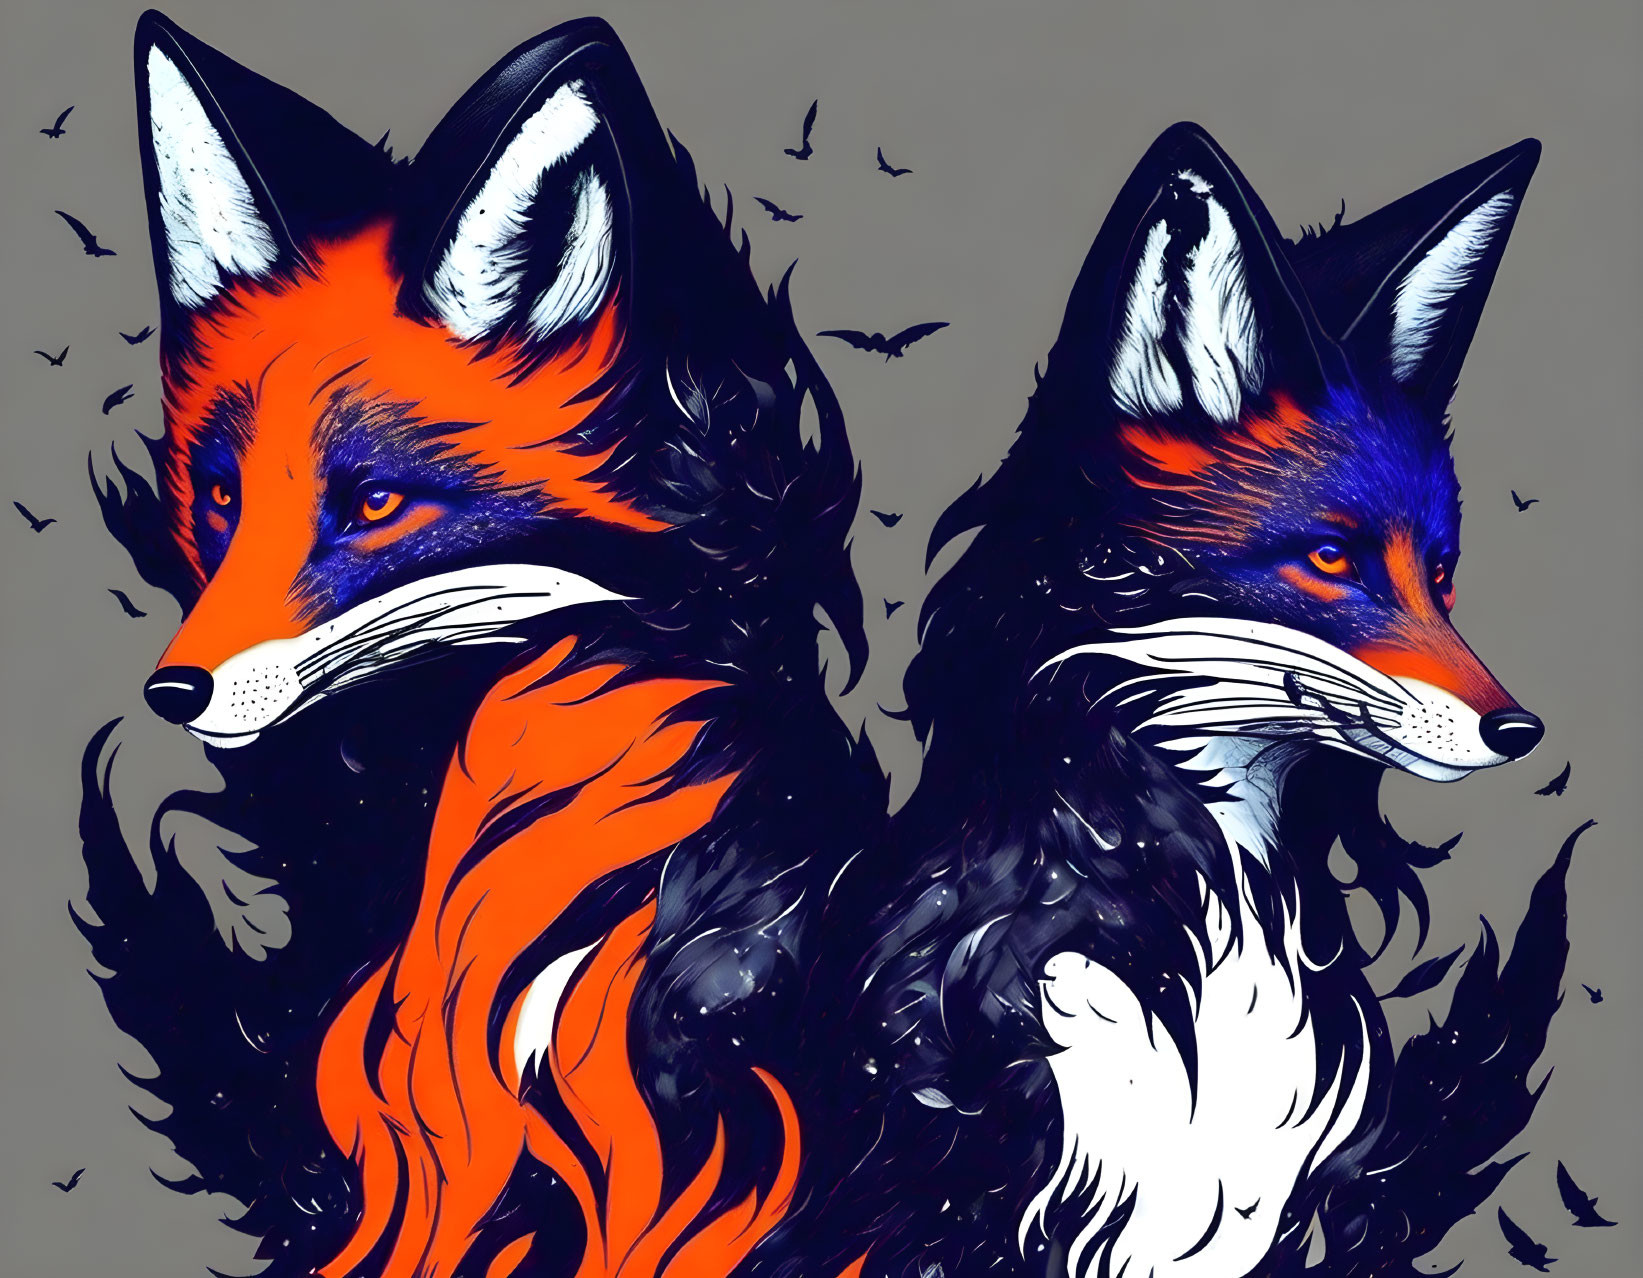 Stylized red and black foxes with blue eyes on grey background with silhouette birds